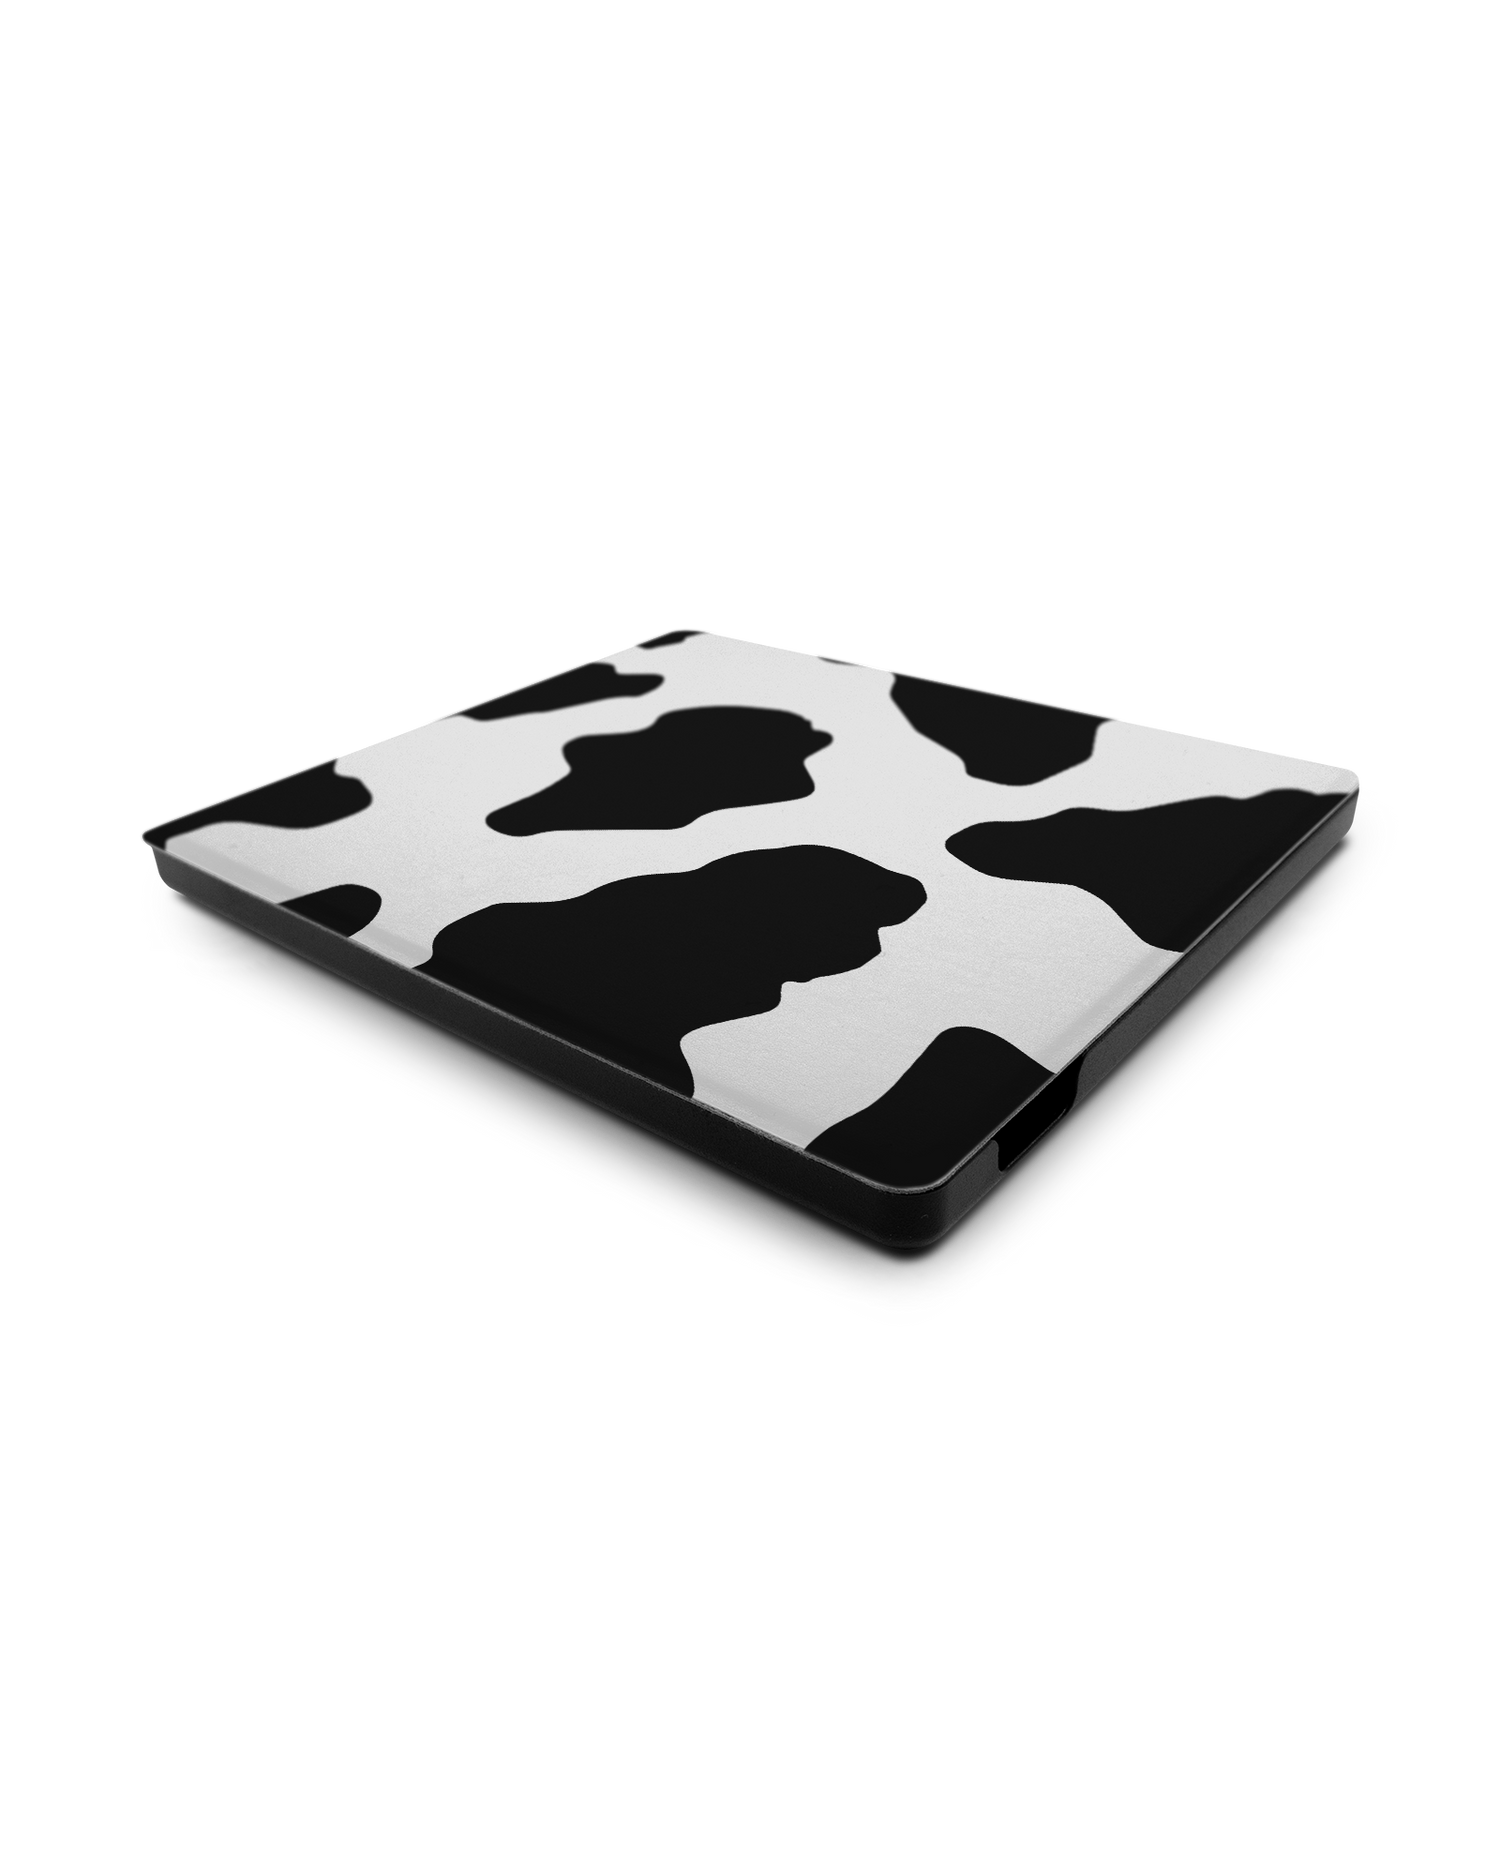 Cow Print 2 eReader Smart Case for Amazon Kindle Oasis: Lying down